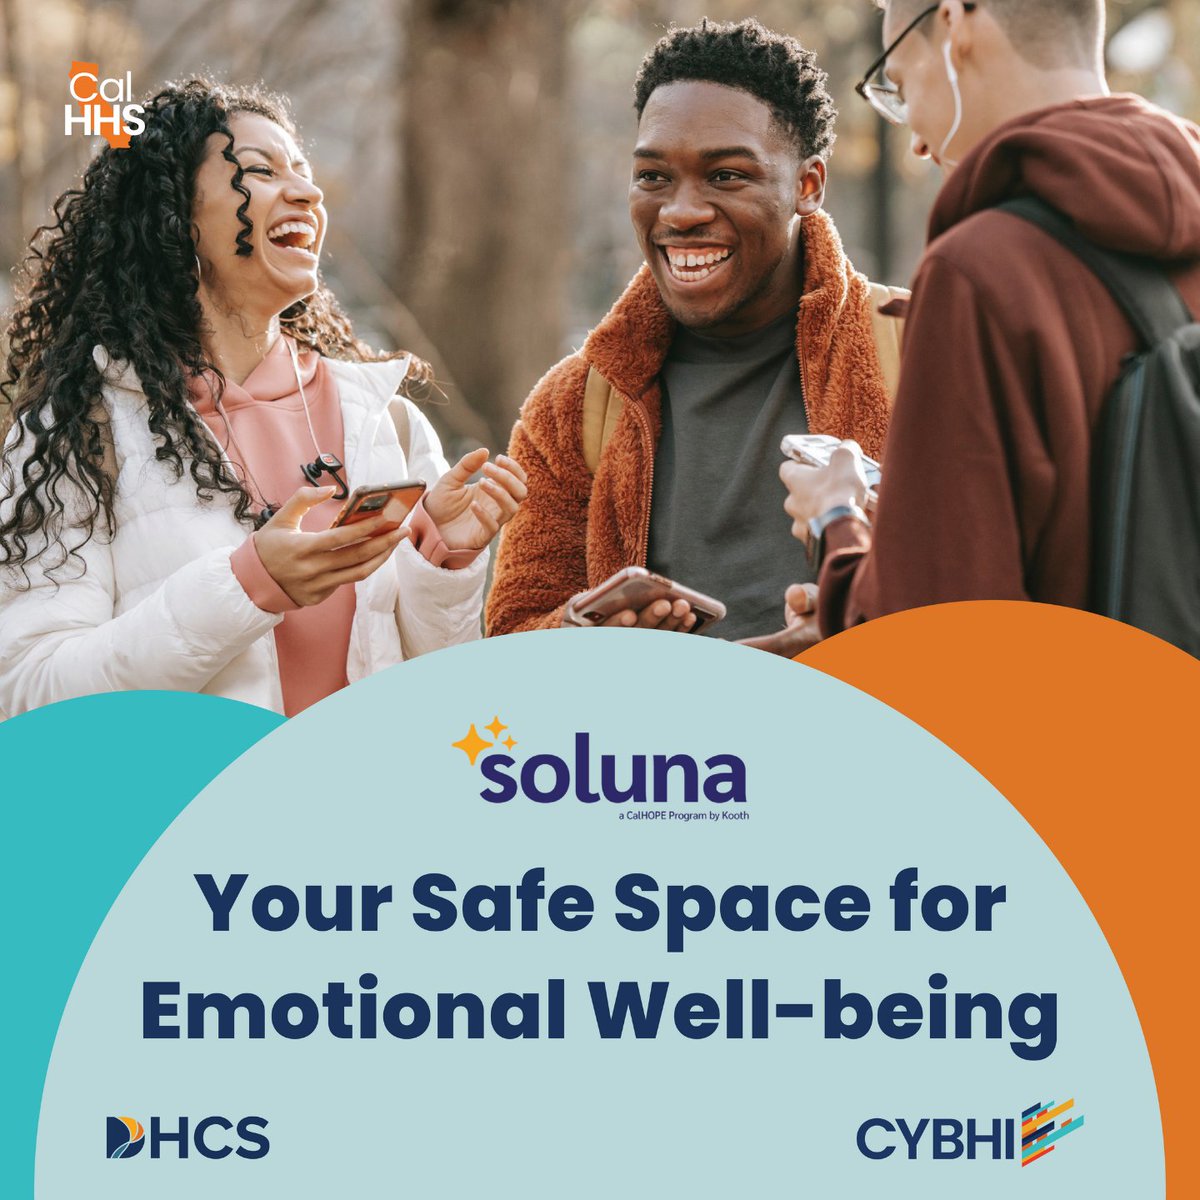 This #MentalHealthAwarenessMonth, we’re focusing on supports for mental and behavioral health issues, especially those youth are facing. Explore thesefree, safe, and confidential mental health support for youth and families with CalHope. #breakthestigma calhope.org